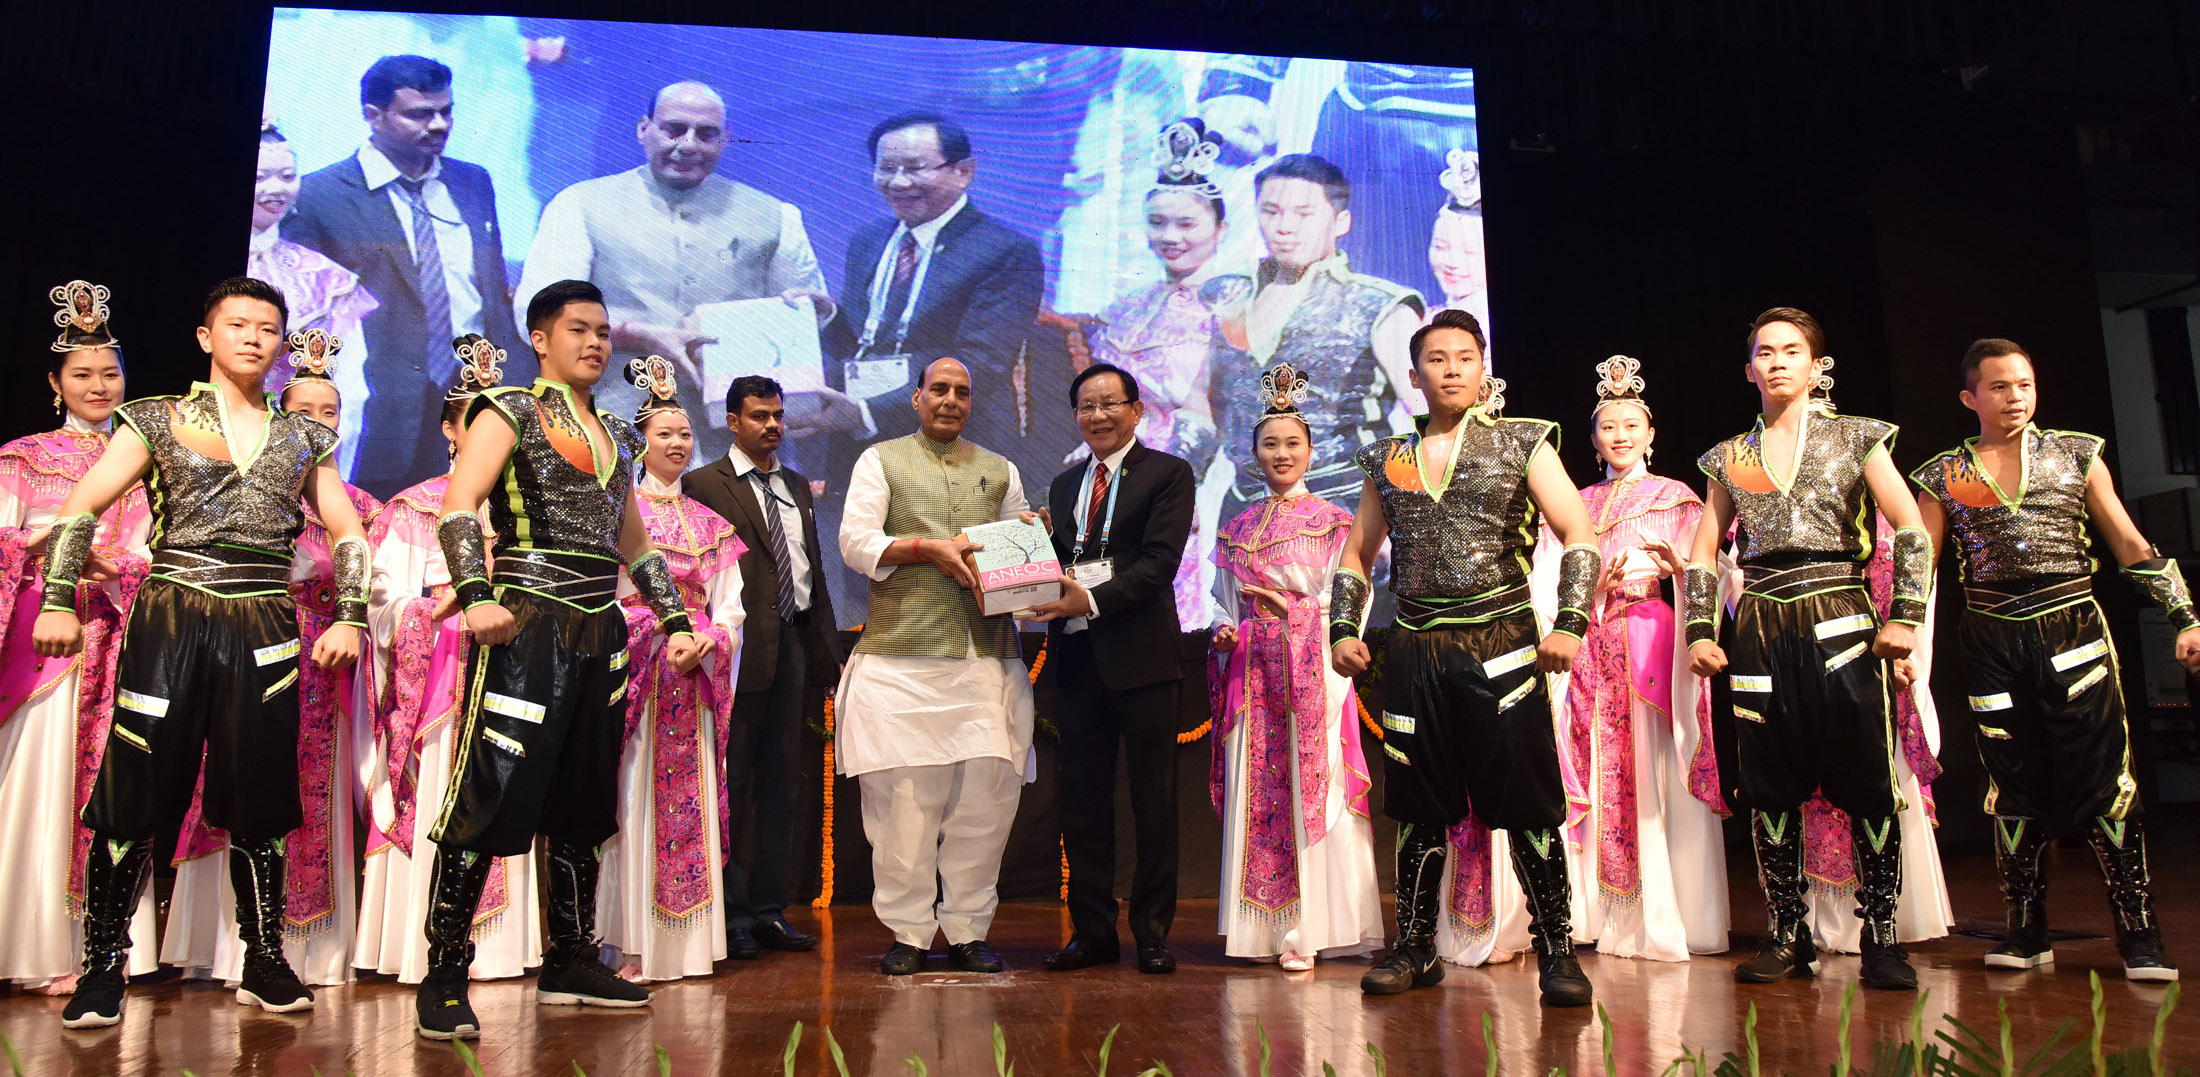 The Union Home Minister, Shri Rajnath Singh being presented a souvenir, during the 17th International Conference of Chief Justice of the world on Article 51 of the Indian Constitution, in New Delhi on November 10, 2016.